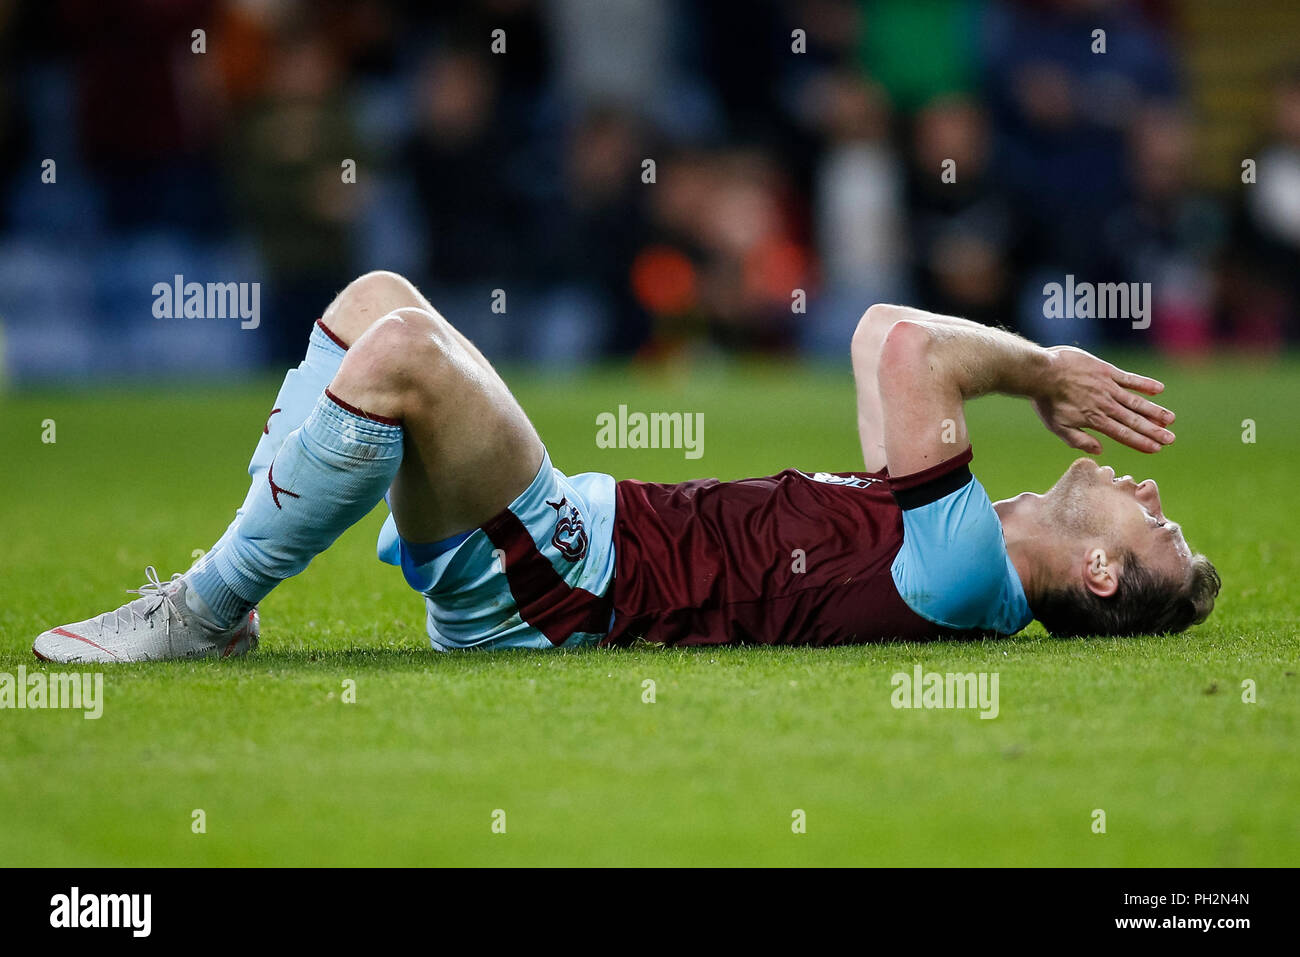 Ashley Barnes High Resolution Stock Photography and Images - Alamy